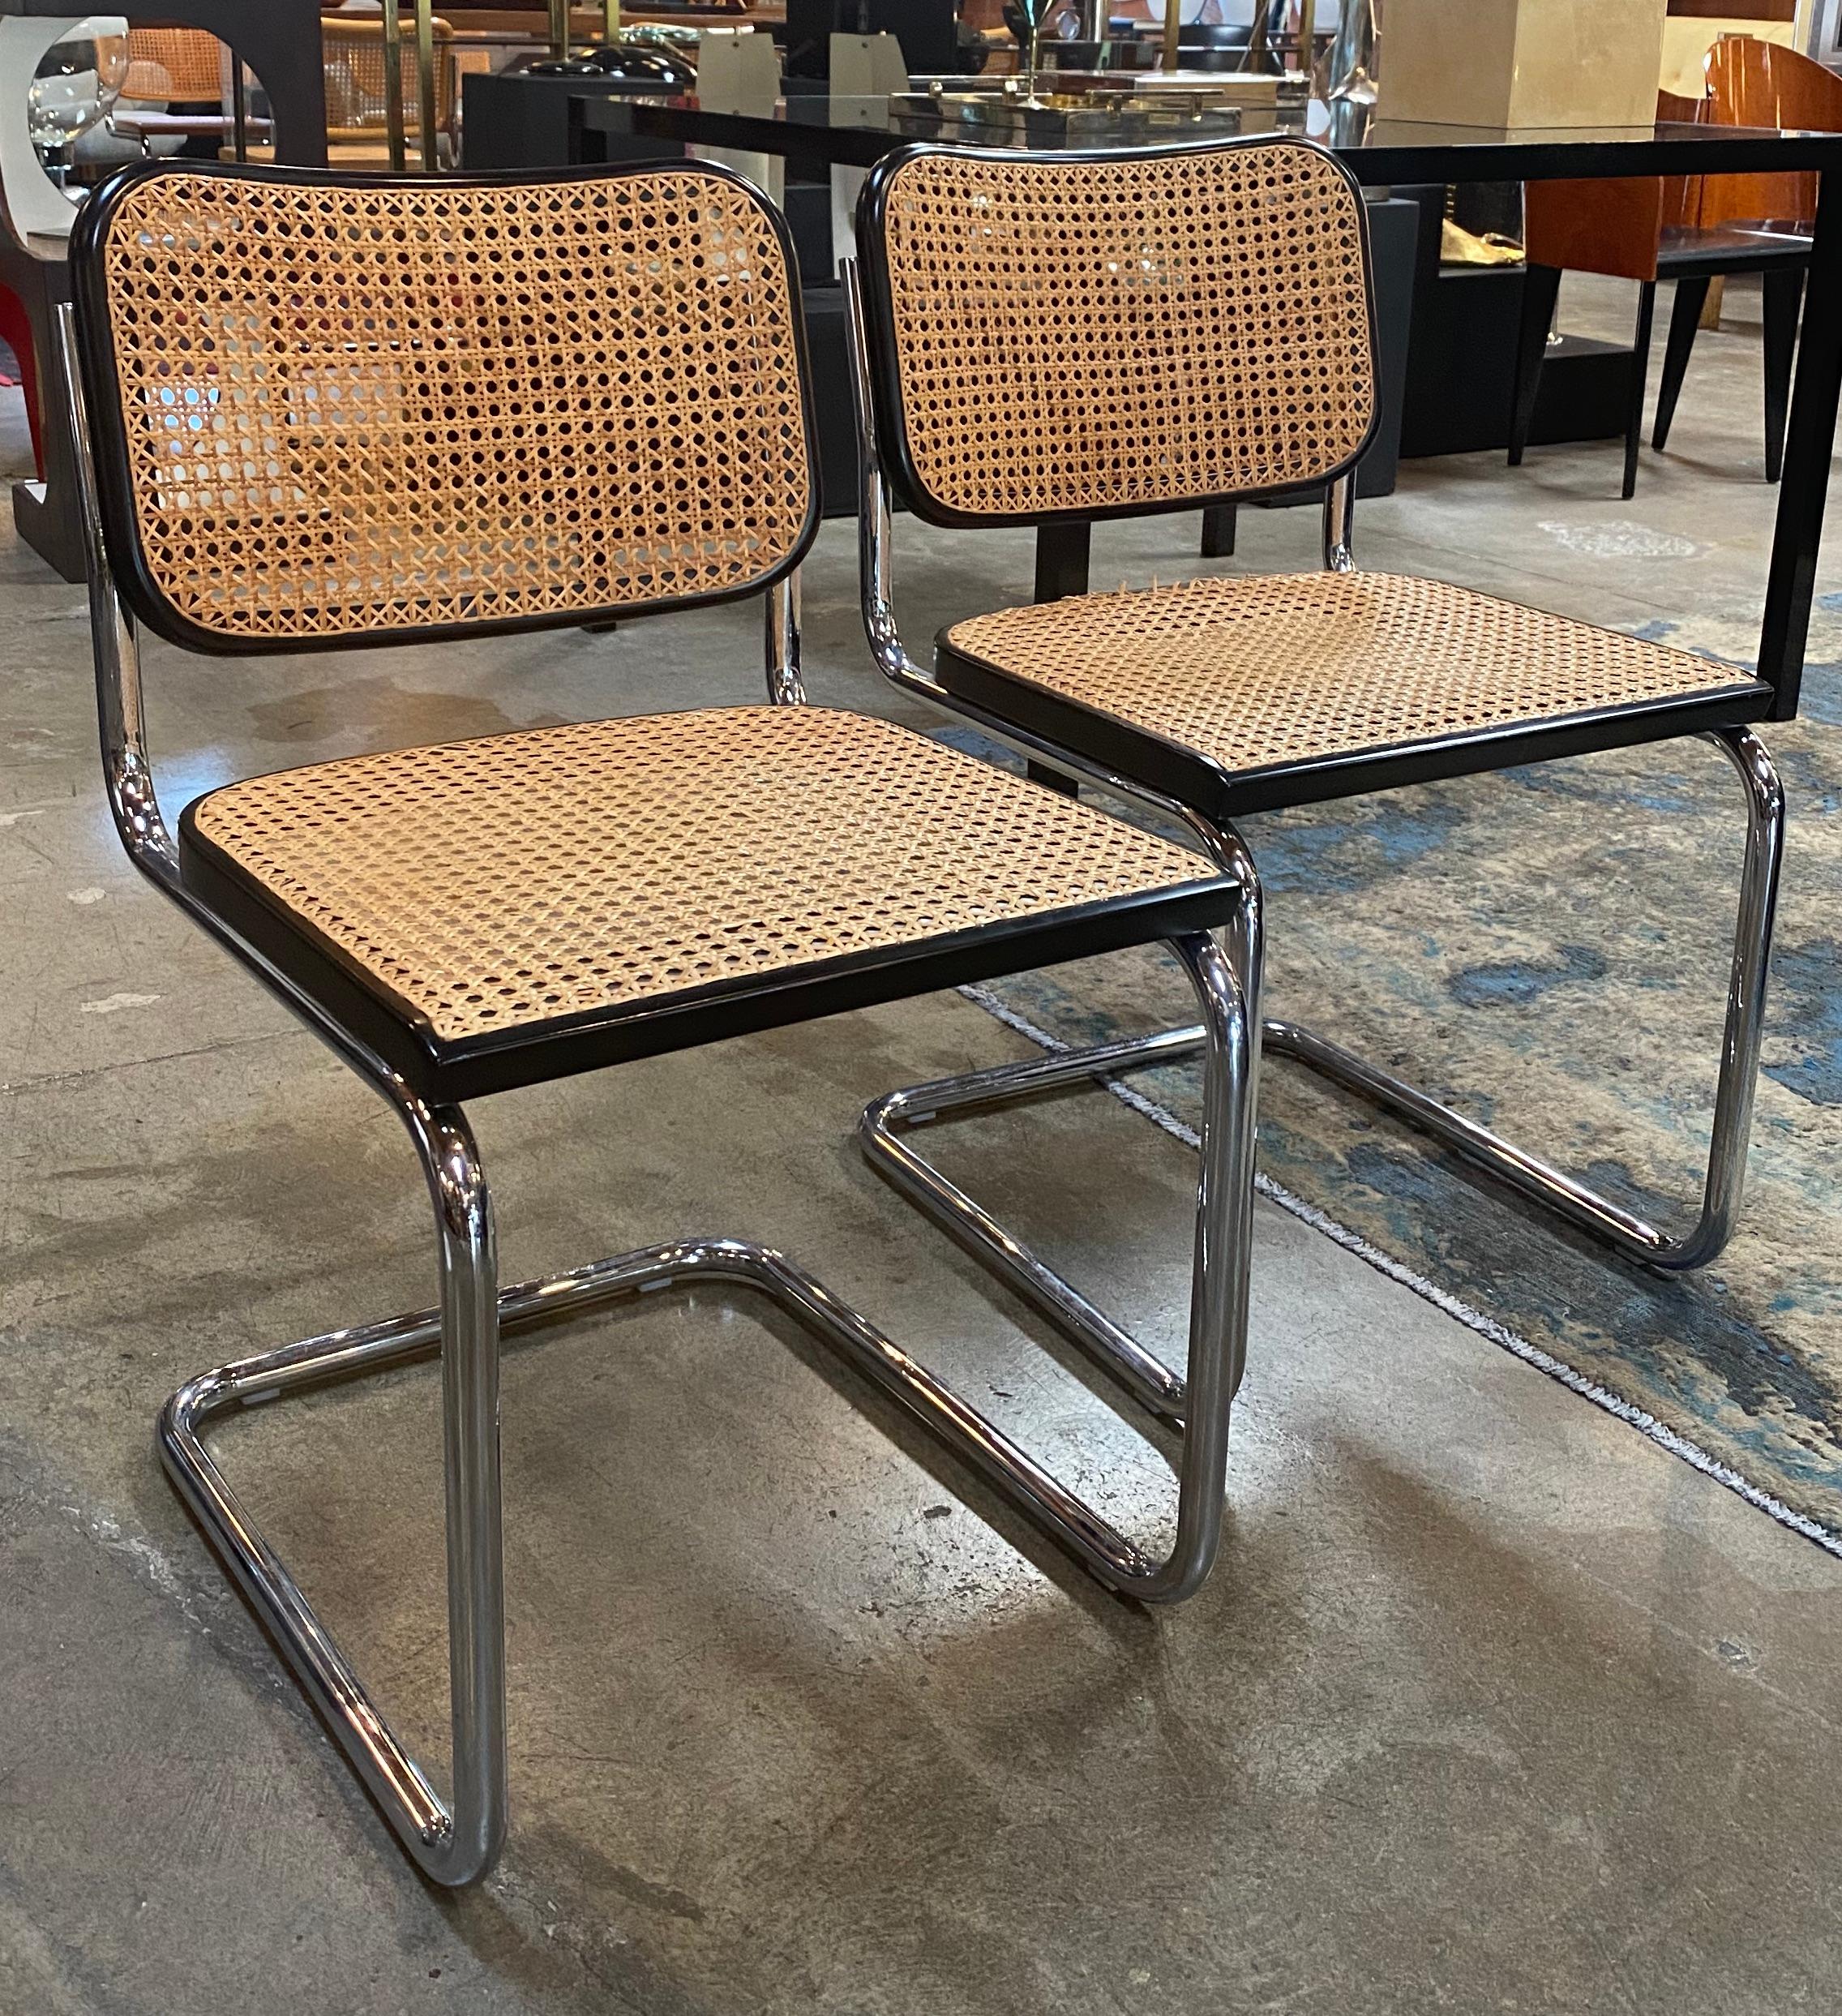 Set of 2 dining chair Cane Cesca ! stunning

The Cesca chair was a chair design in 1928 by Marcel Breuer, using tubular steel. It was named Cesca as a tribute to Breuer’s adopted daughter Francesca (nicknamed Cheska).
In 1968 the chair was